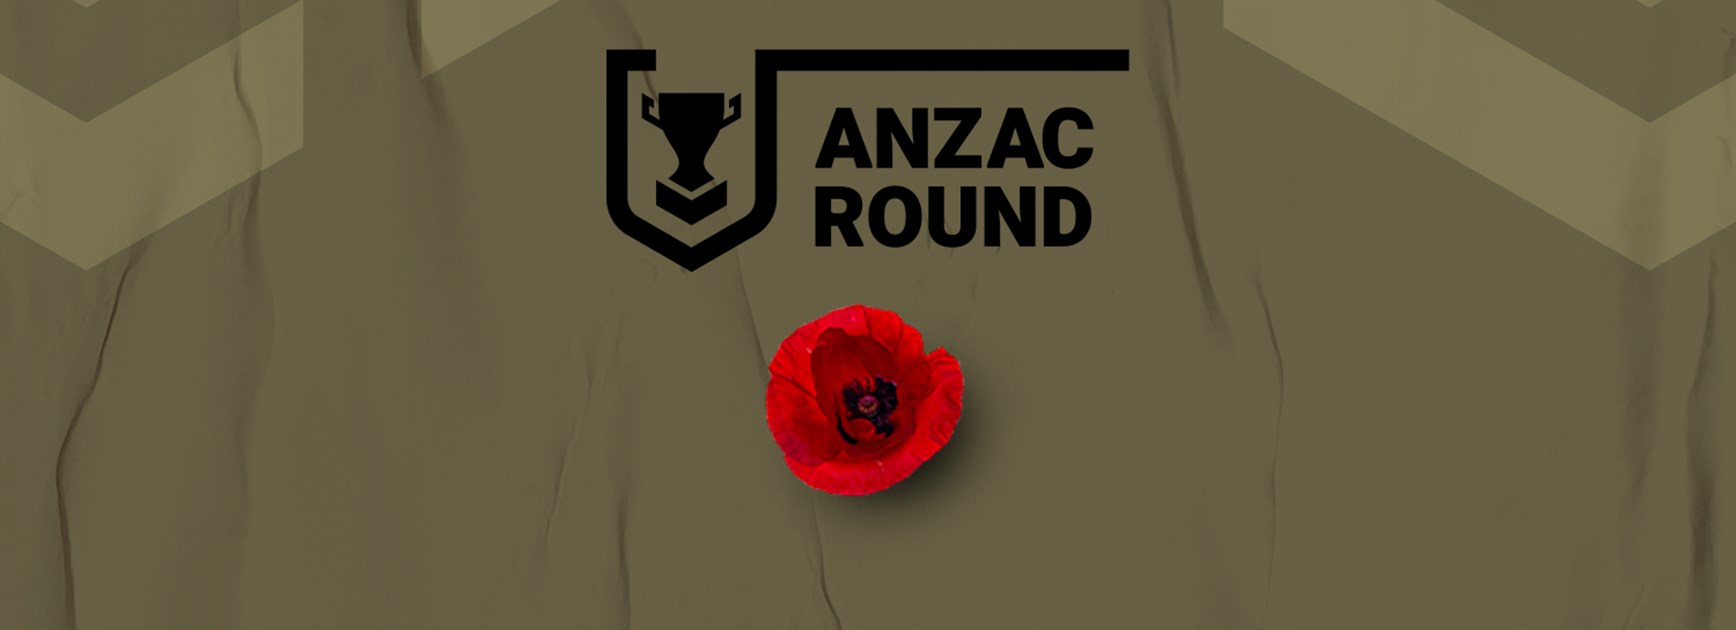 Round 5 preview: Anzac Round a special occasion